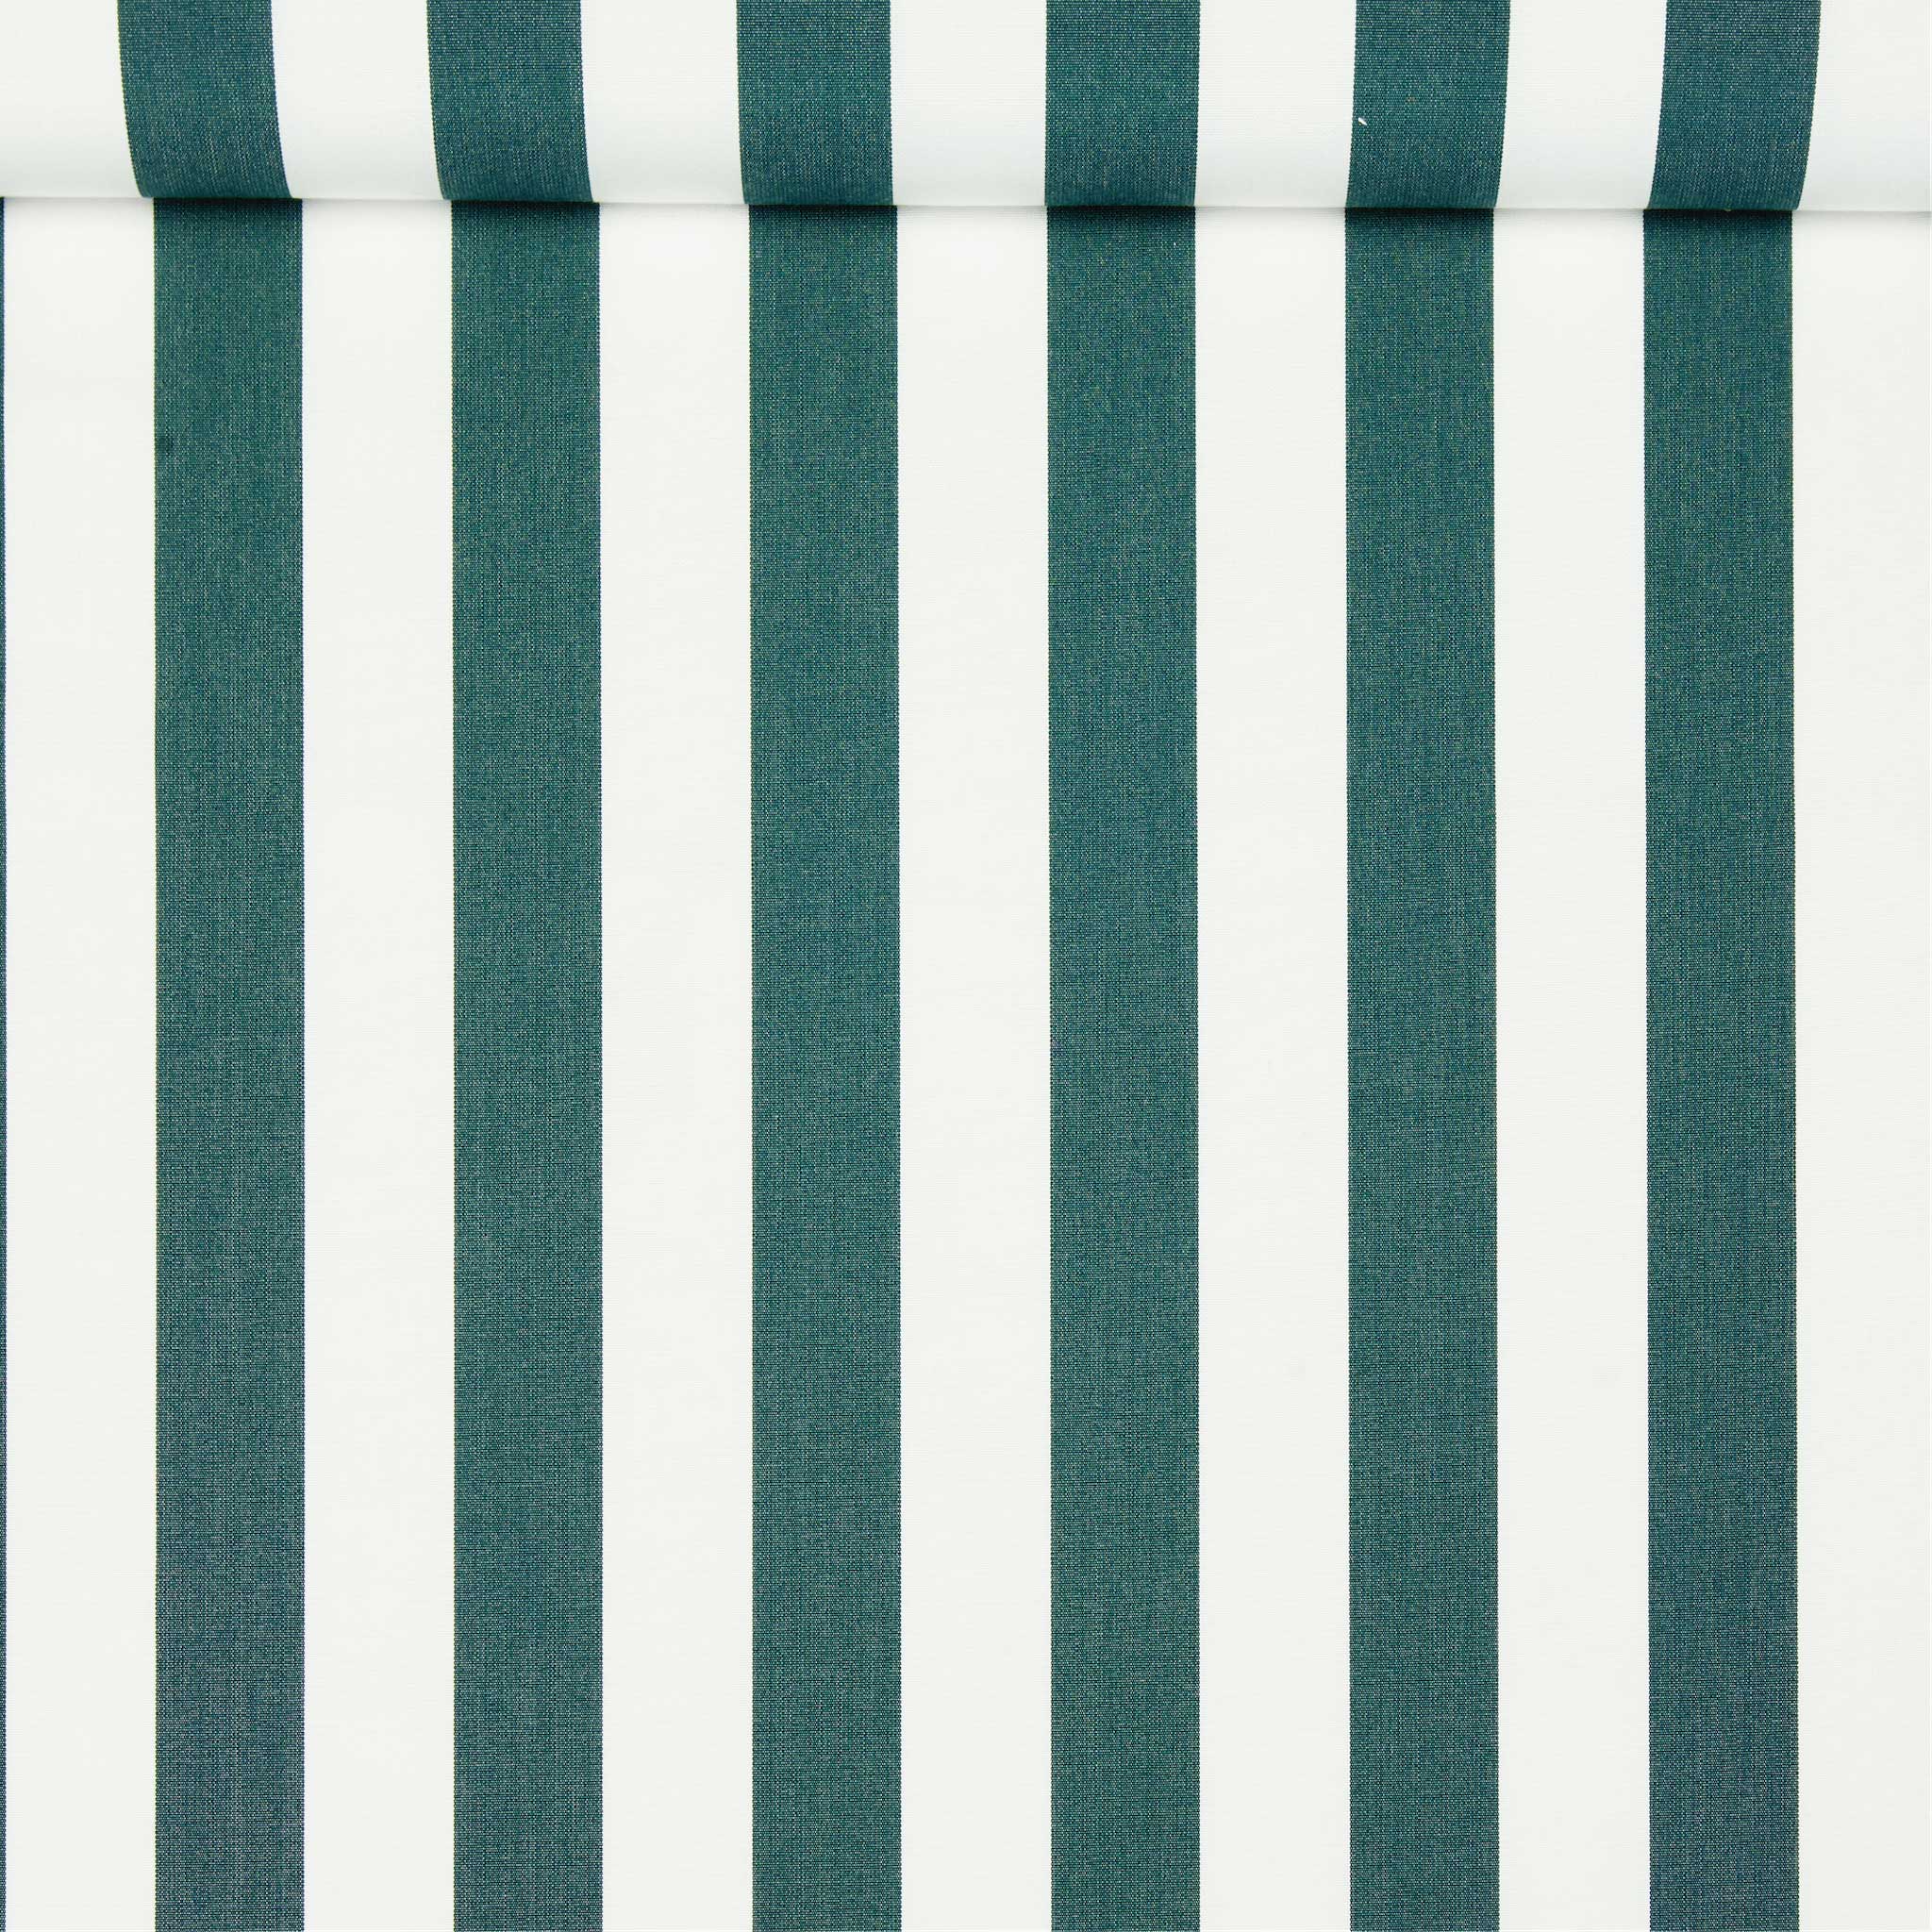 A birds eye view of a jacquard woven green and white stripe pattern outdoor performance fabric roll. 